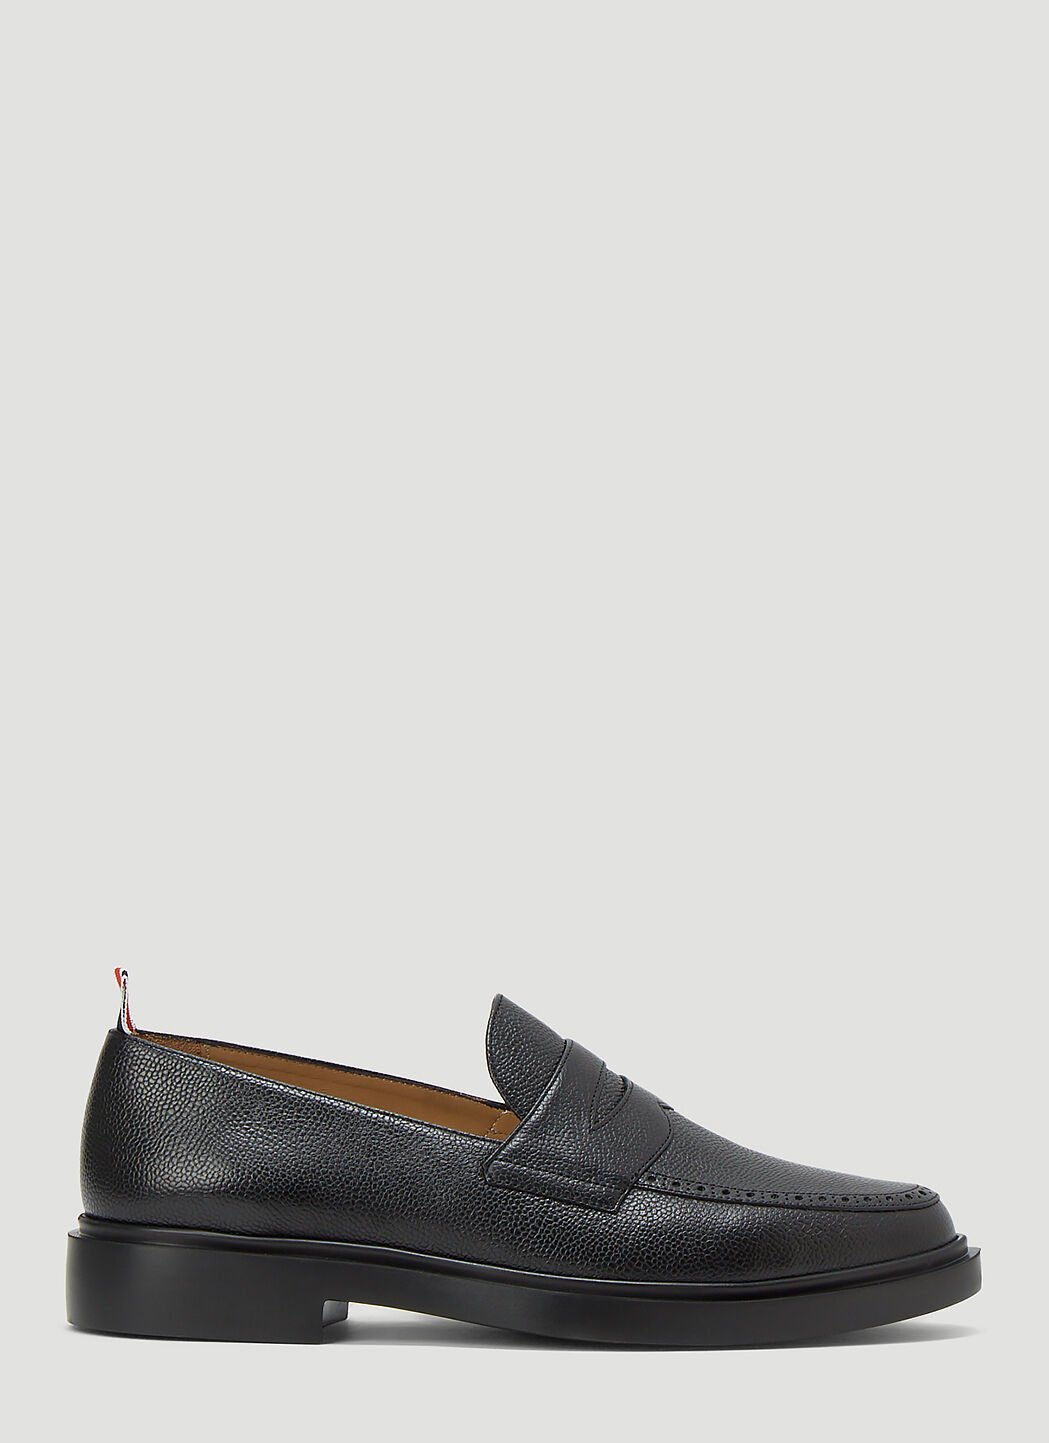 Thom Browne Slip-On Loafers Blue thb0155010